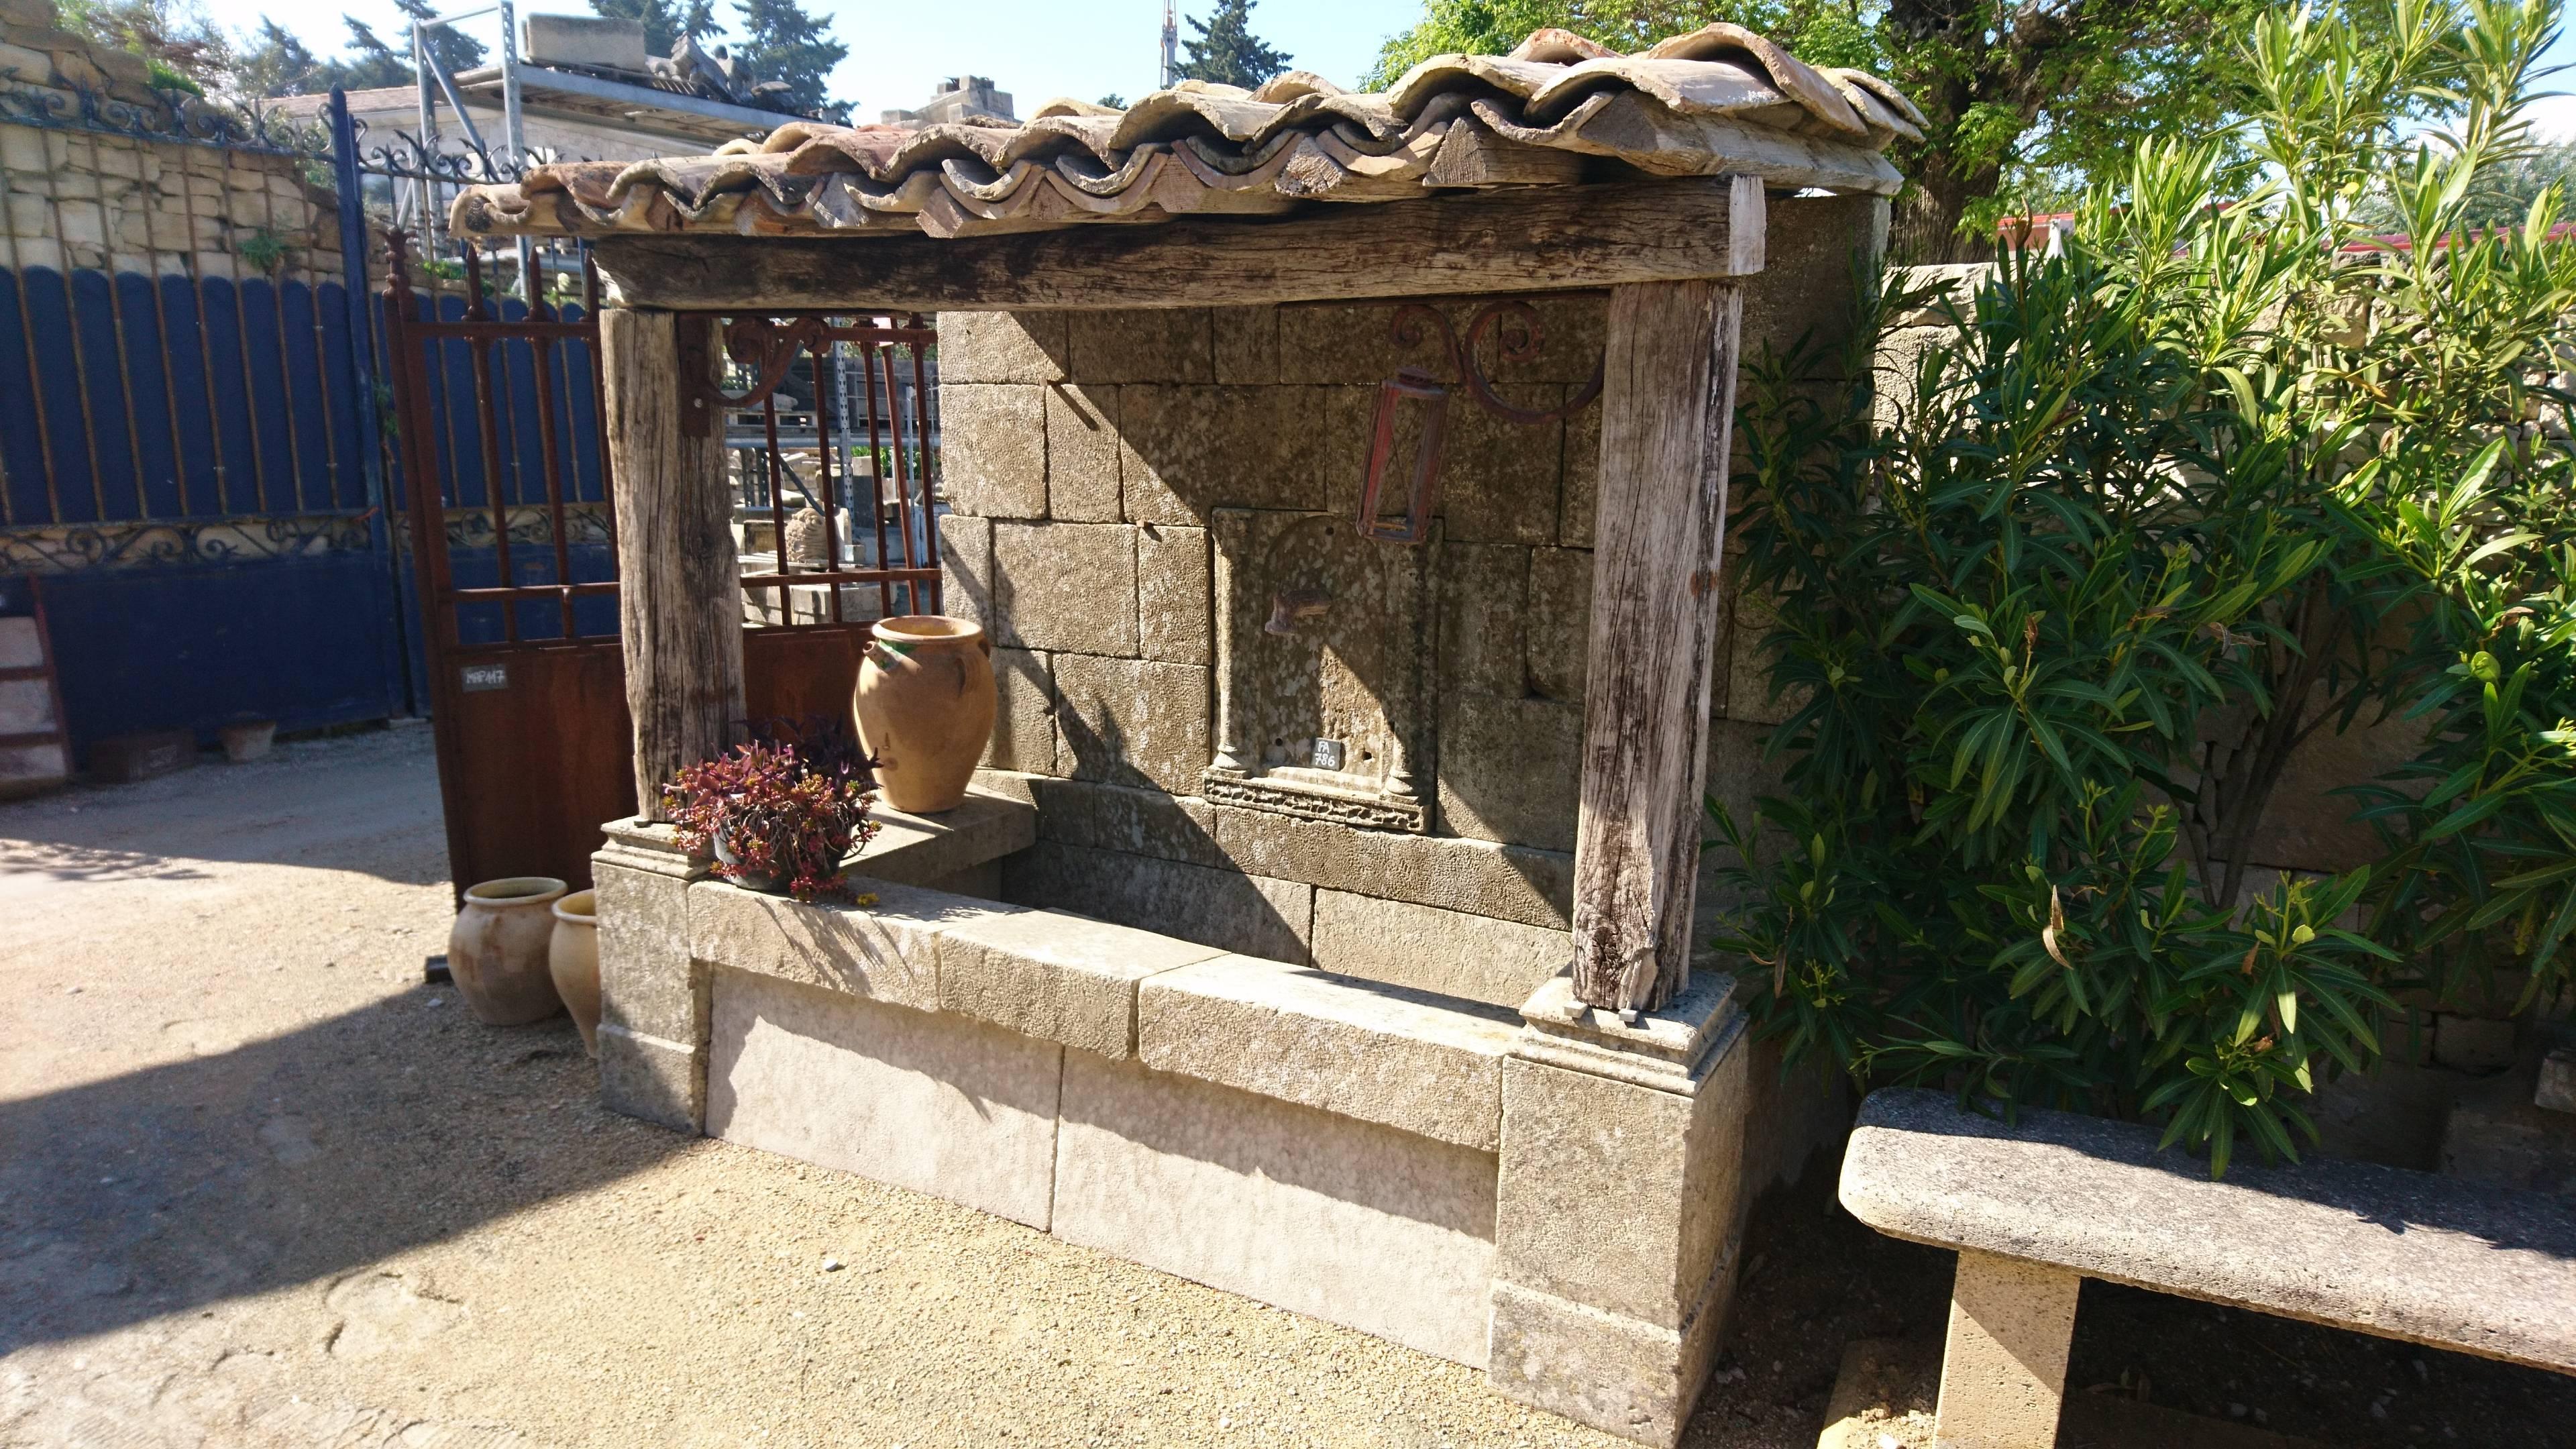 If you are looking for something unique, original and full of charm to enhance your garden, then this superb fountain composed of genuine antique materials might be the answer!

This wall fountain has been built to looks like an antique covered